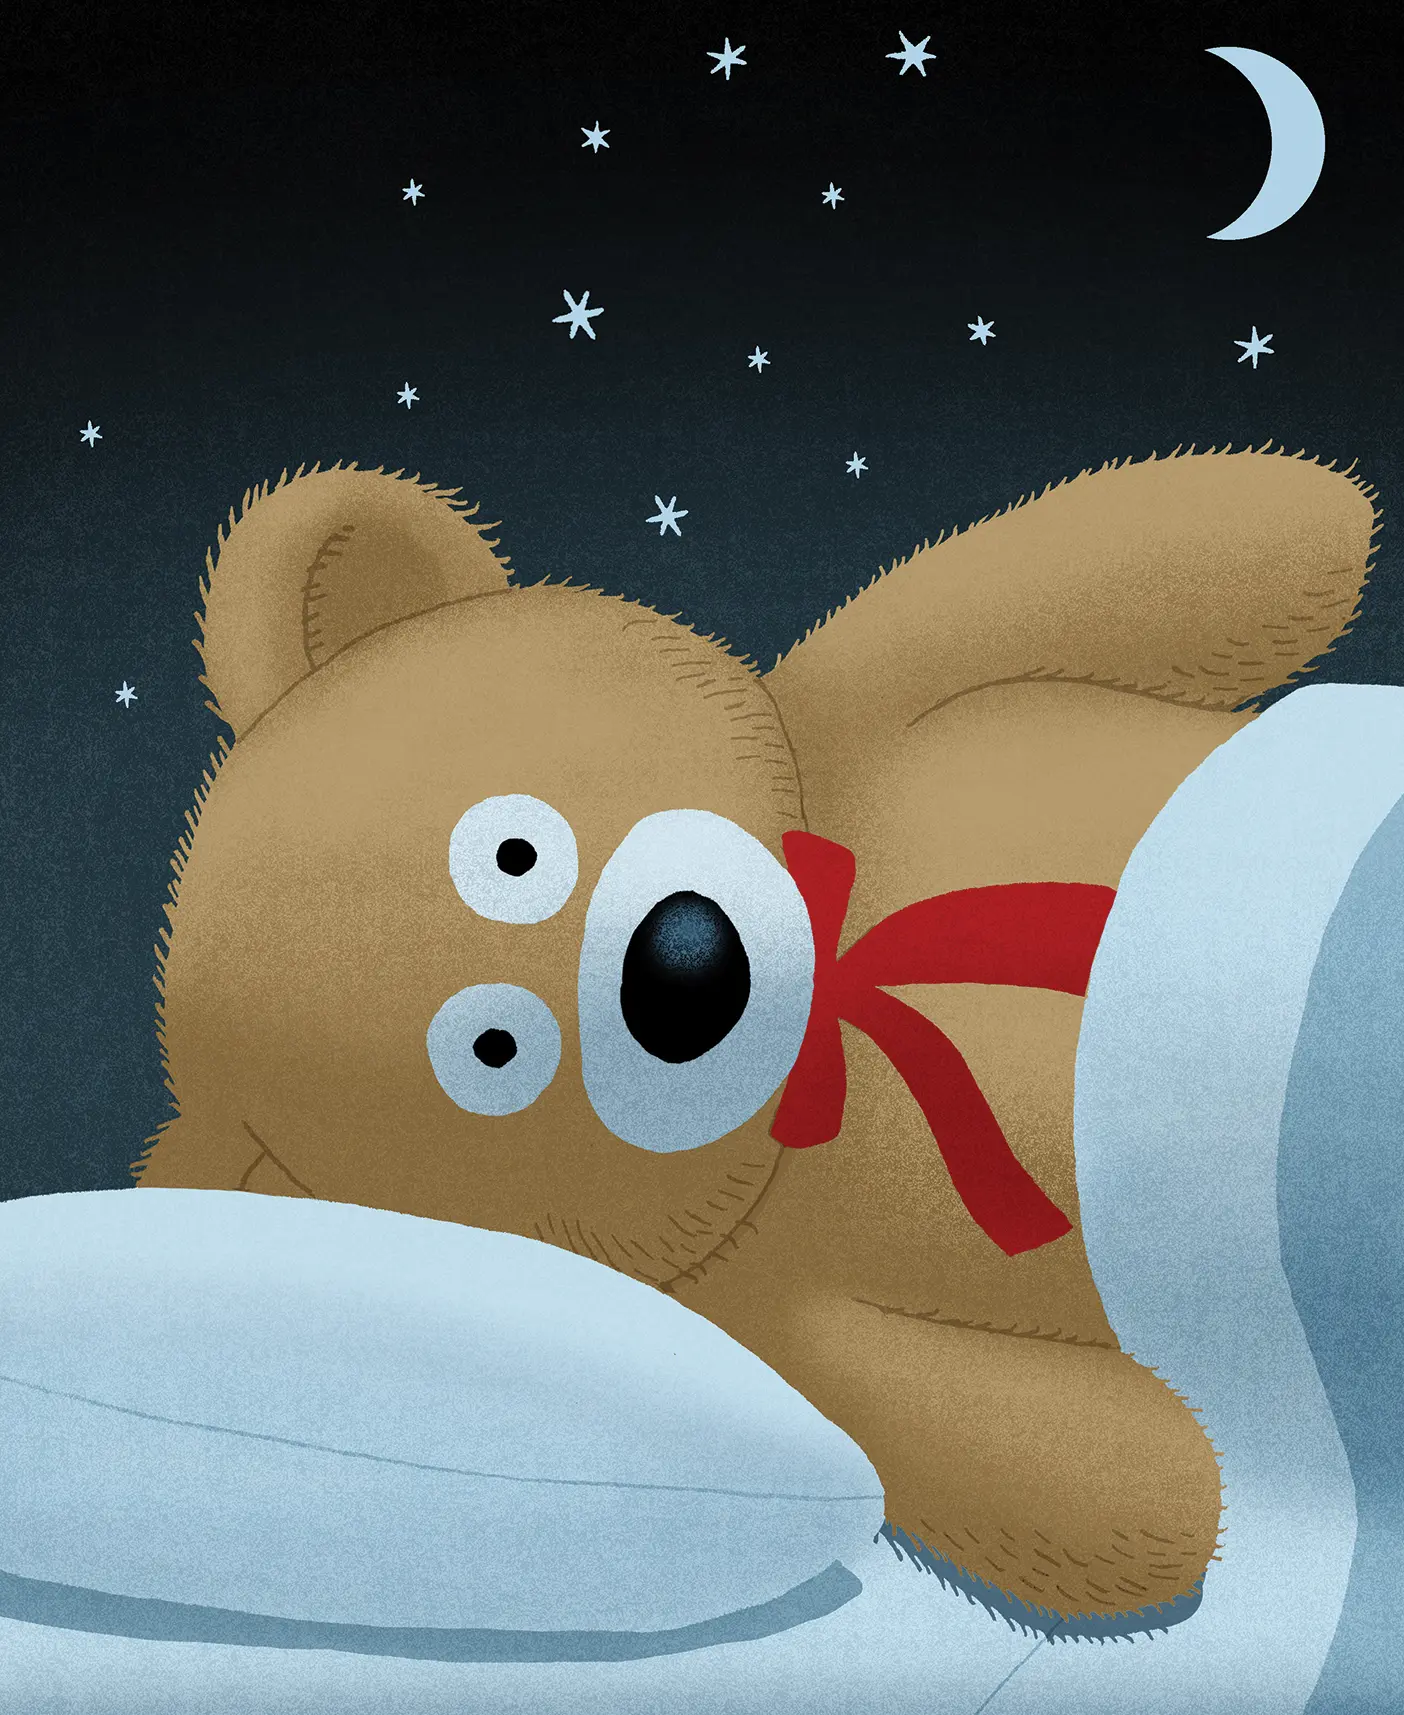 With the moon and stars shining in the night sky, a furry teddy bear with a red bow is lying in bed on a soft pillow, eyes big and wide awake.